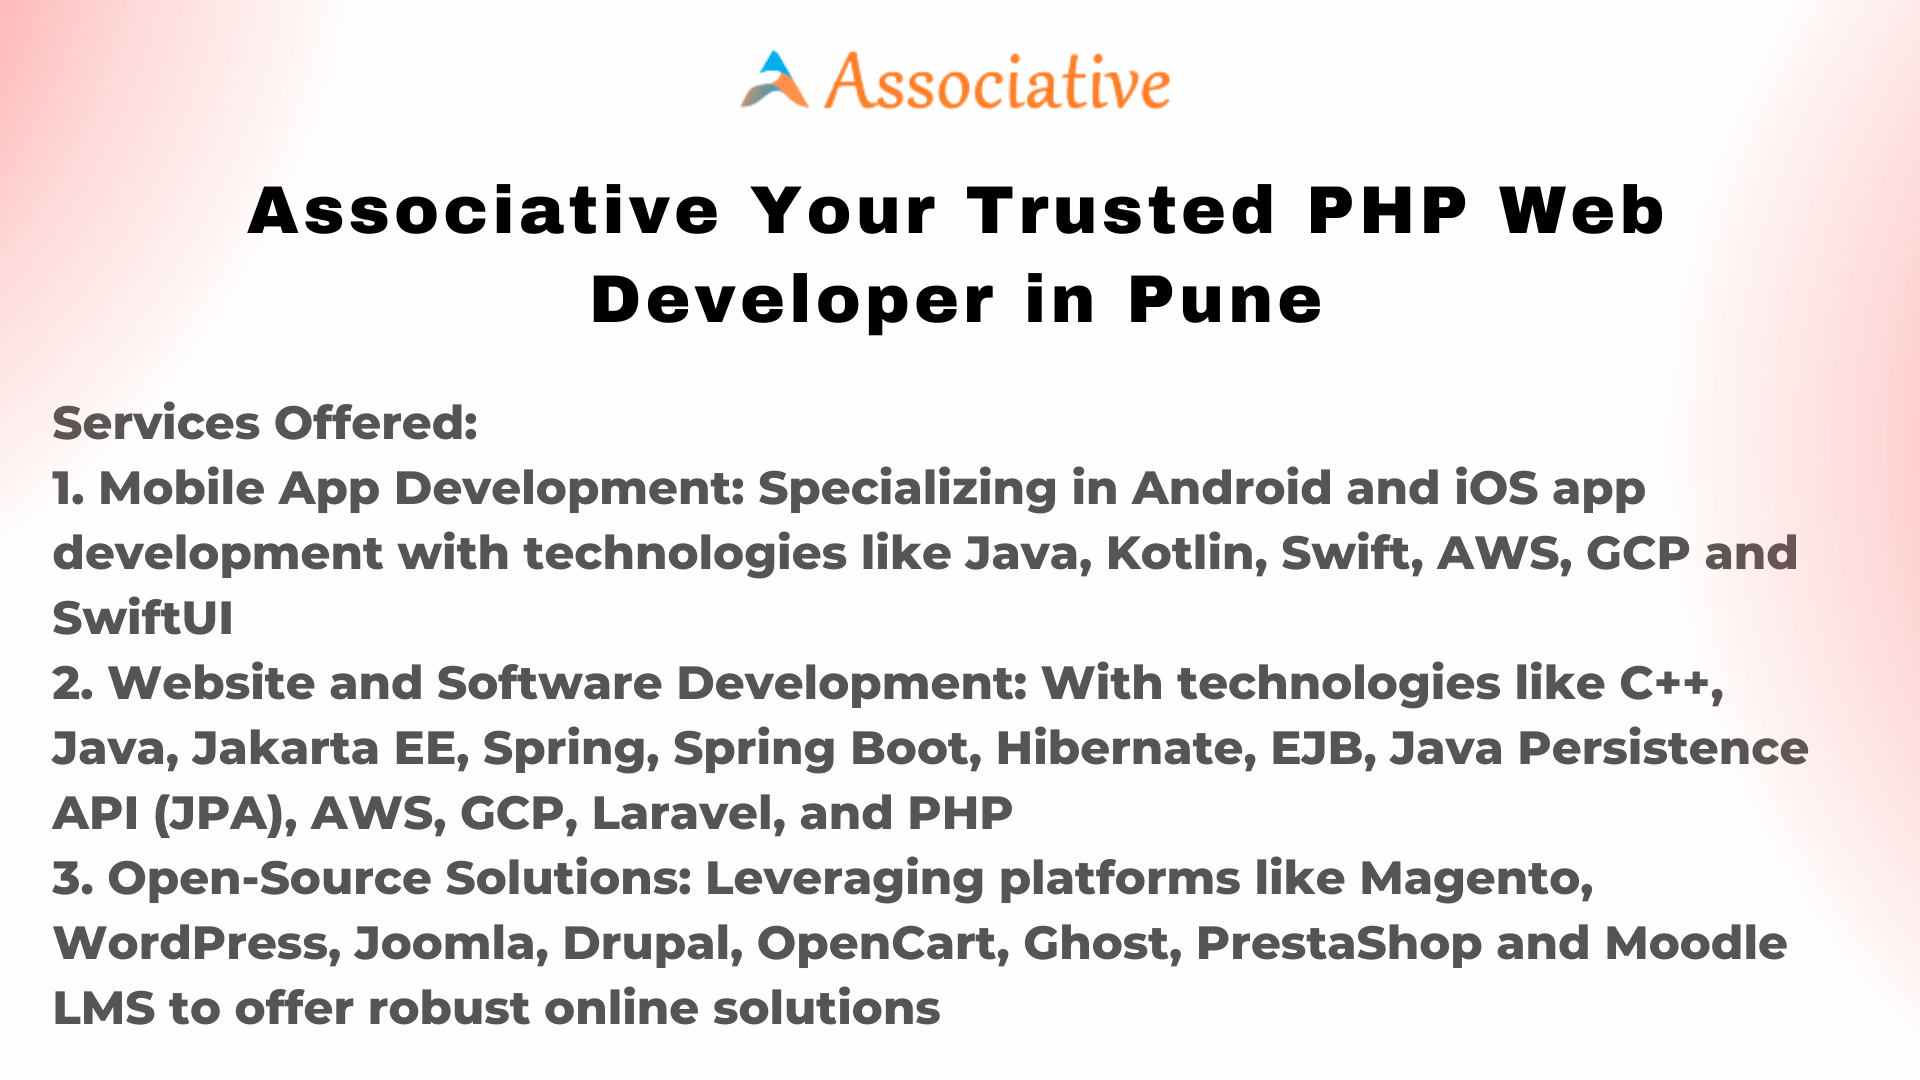 Associative Your Trusted PHP Web Developer in Pune